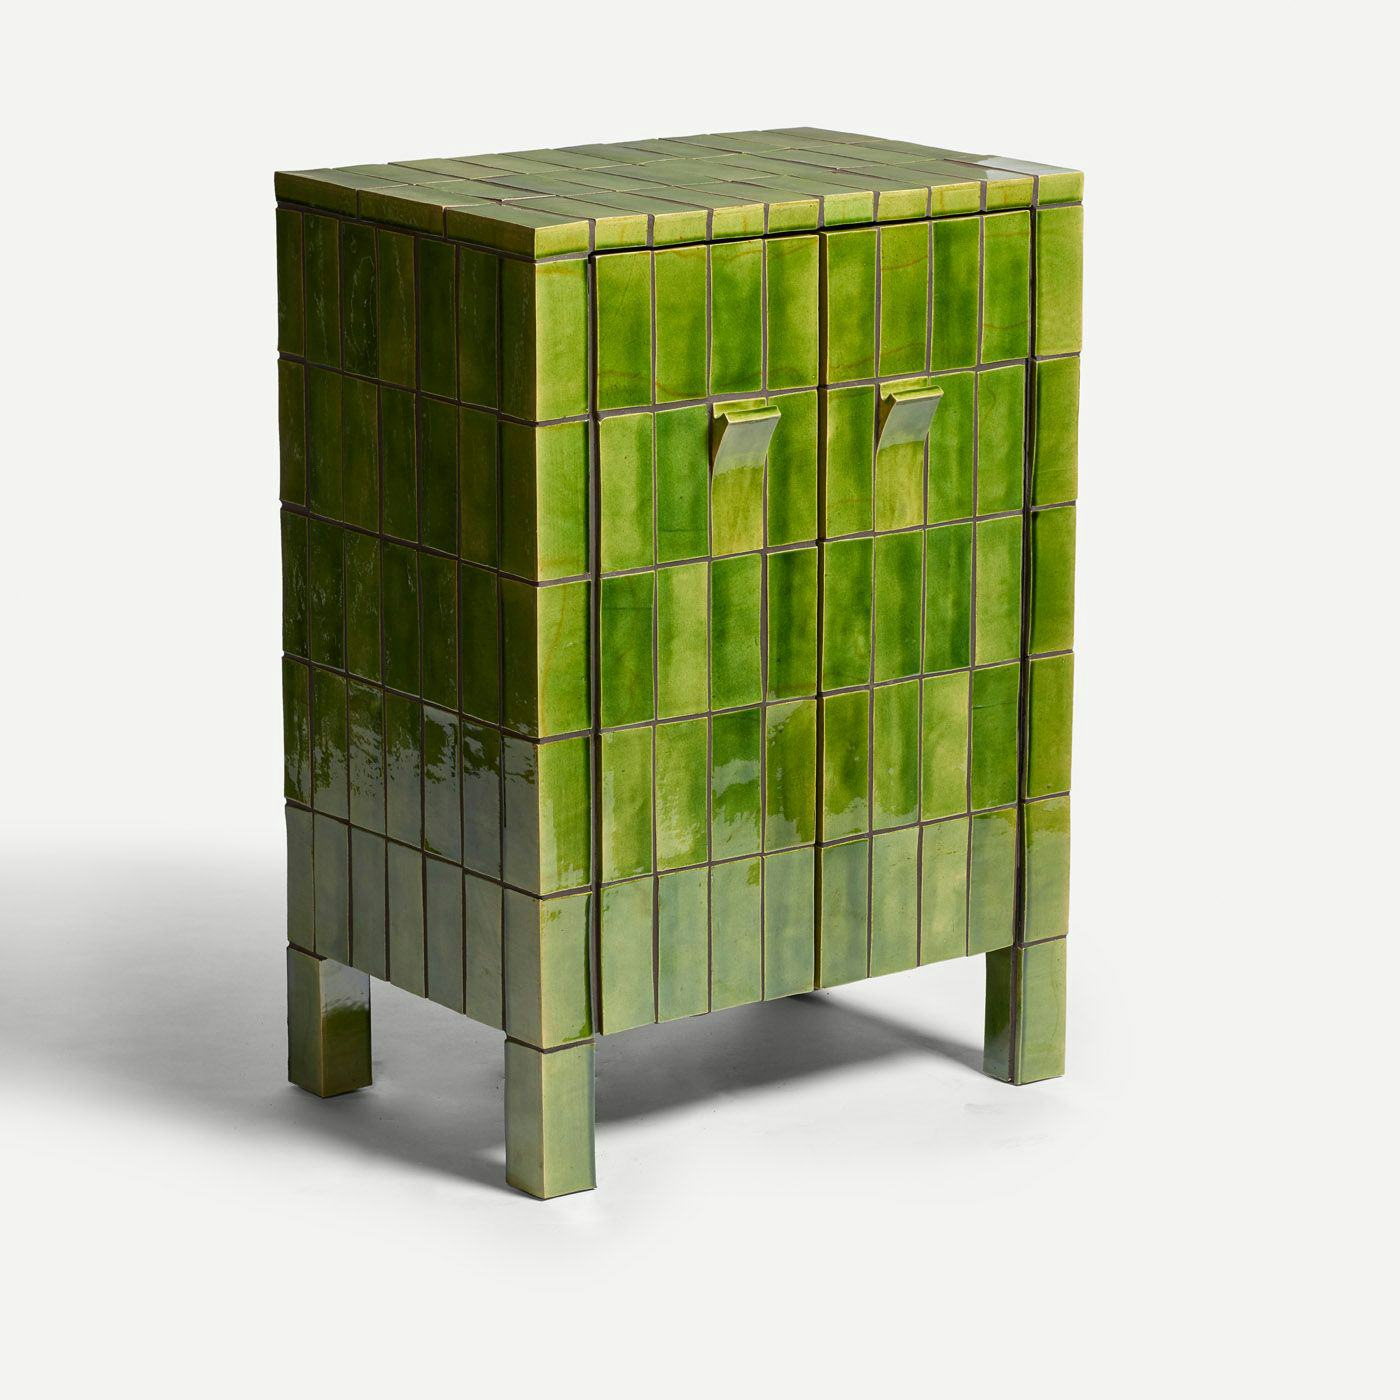 A green tiled cupboard against a white background